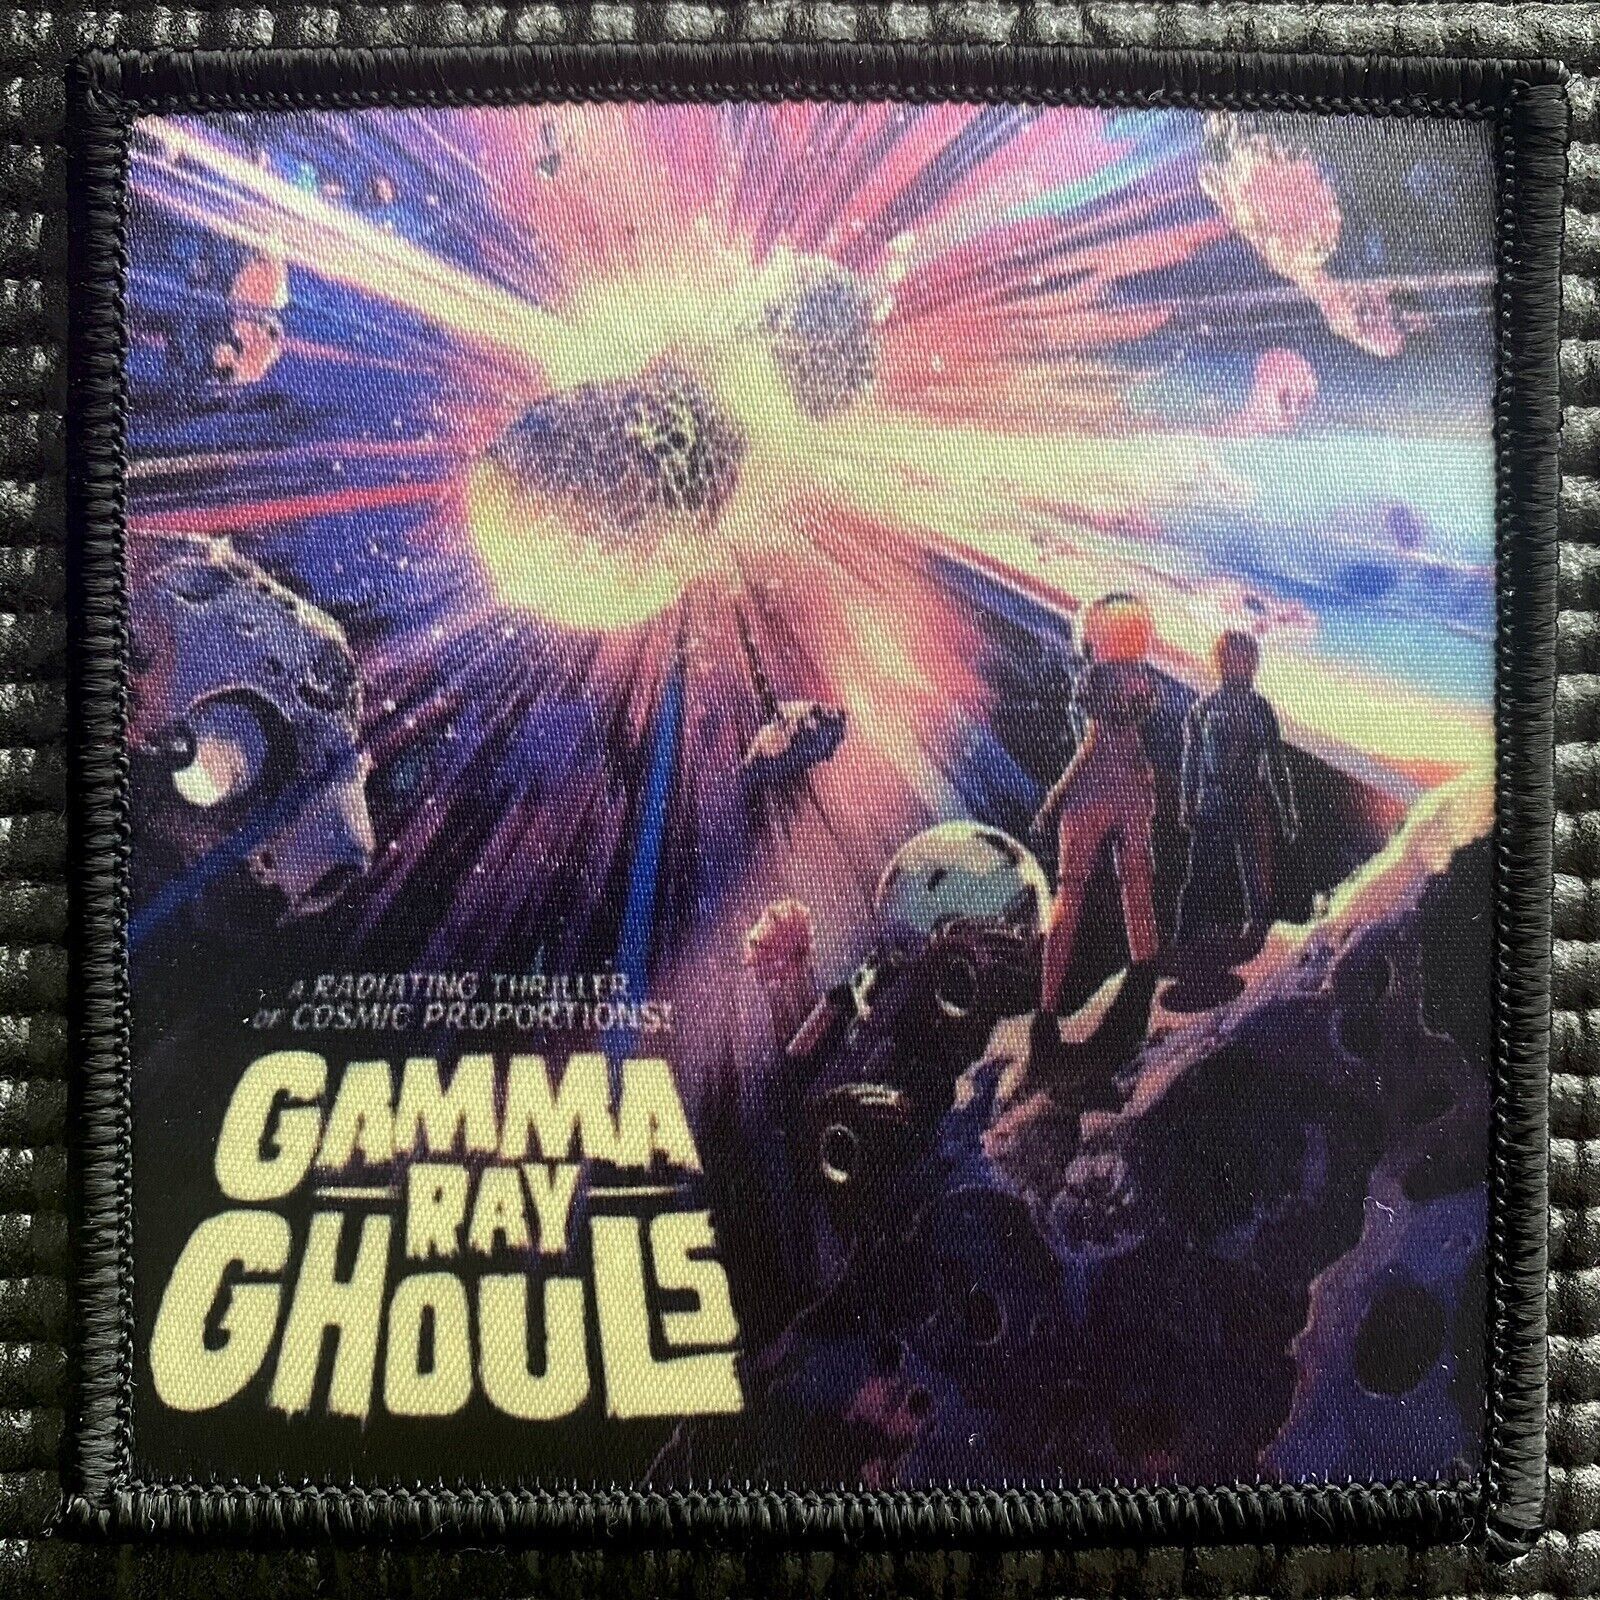 NASA JPL “GAMMA RAY GHOULS” EXOPLANET EXPLORATION SPACE PATCH- 3.5”